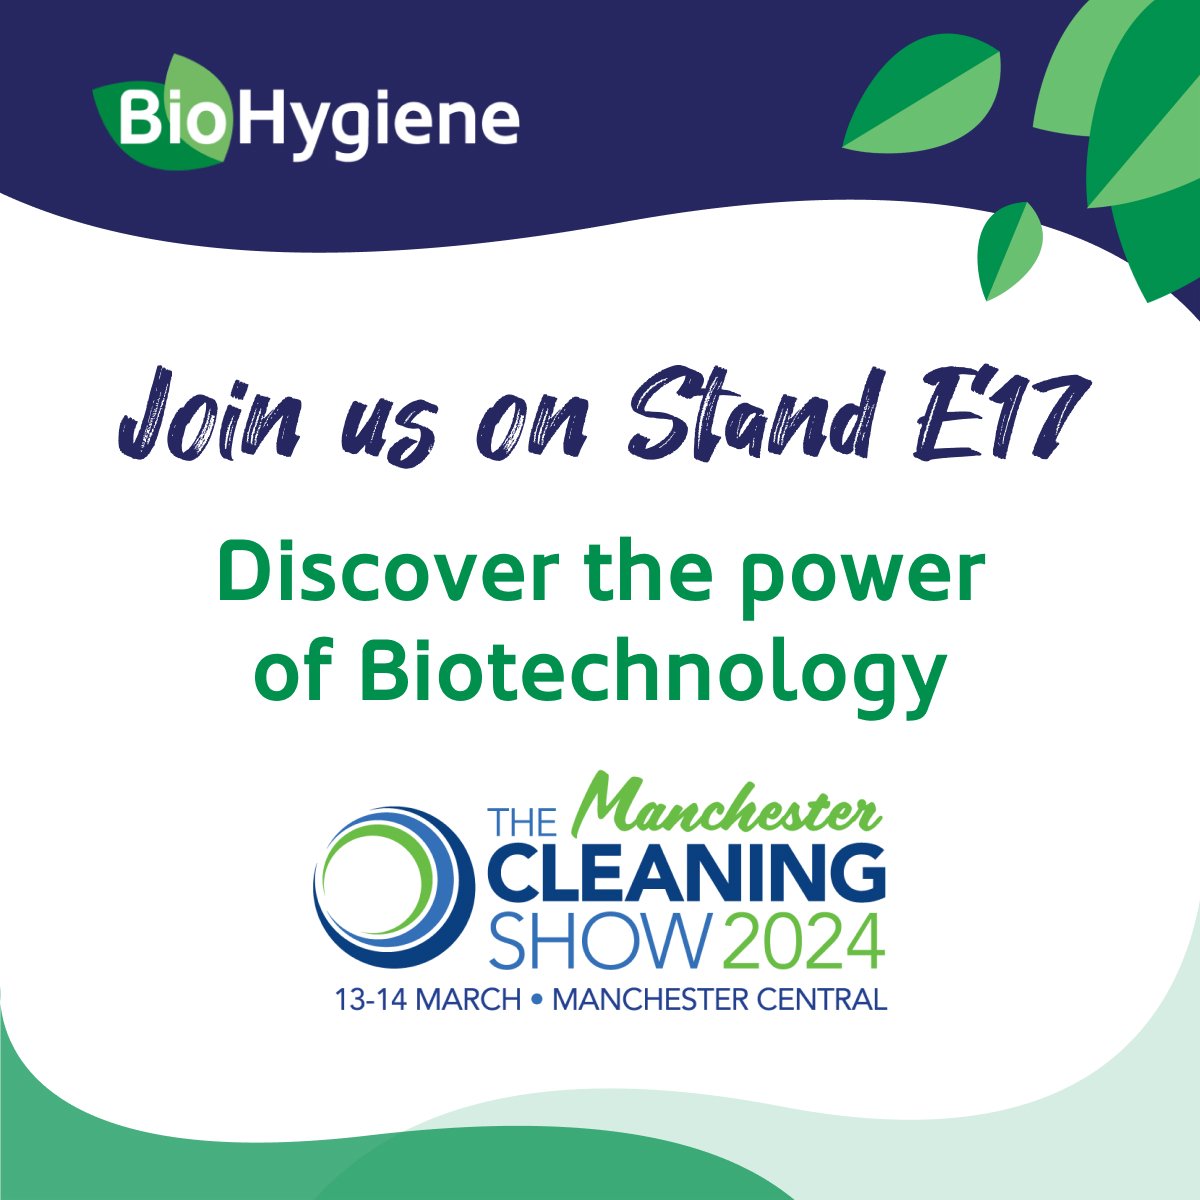 BioHygiene Heads North to Exhibit at the Manchester Cleaning Show